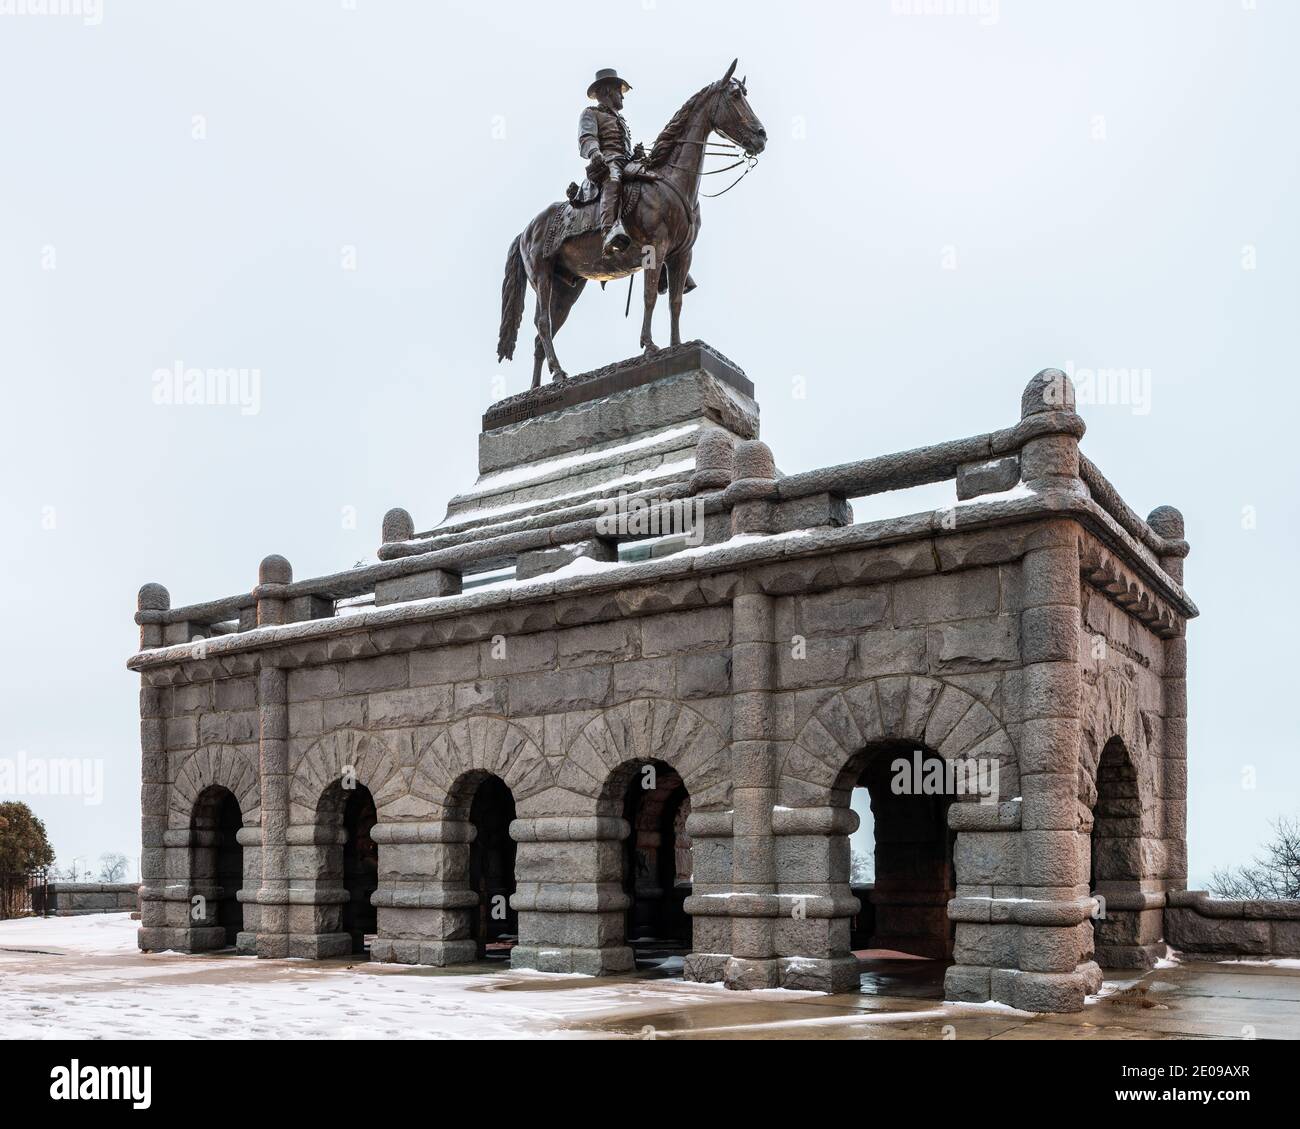 Ulysses S. Grant monument in Lincoln Park during winter Stock Photo